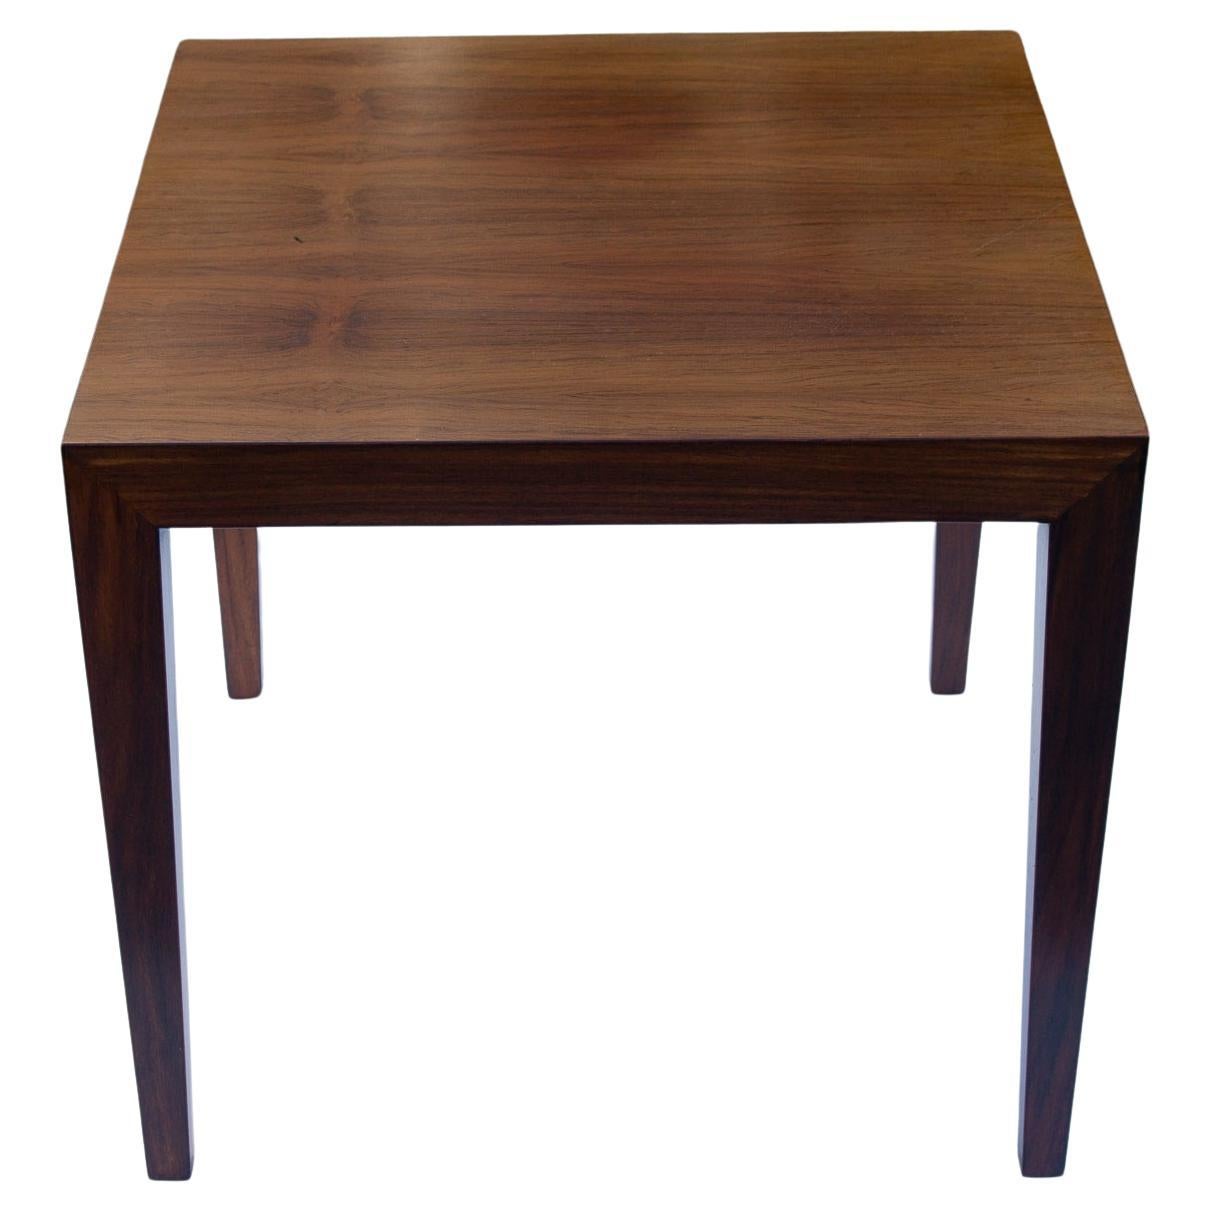 Vintage Danish Rosewood Coffee Table by Severin Hansen, 1960s For Sale